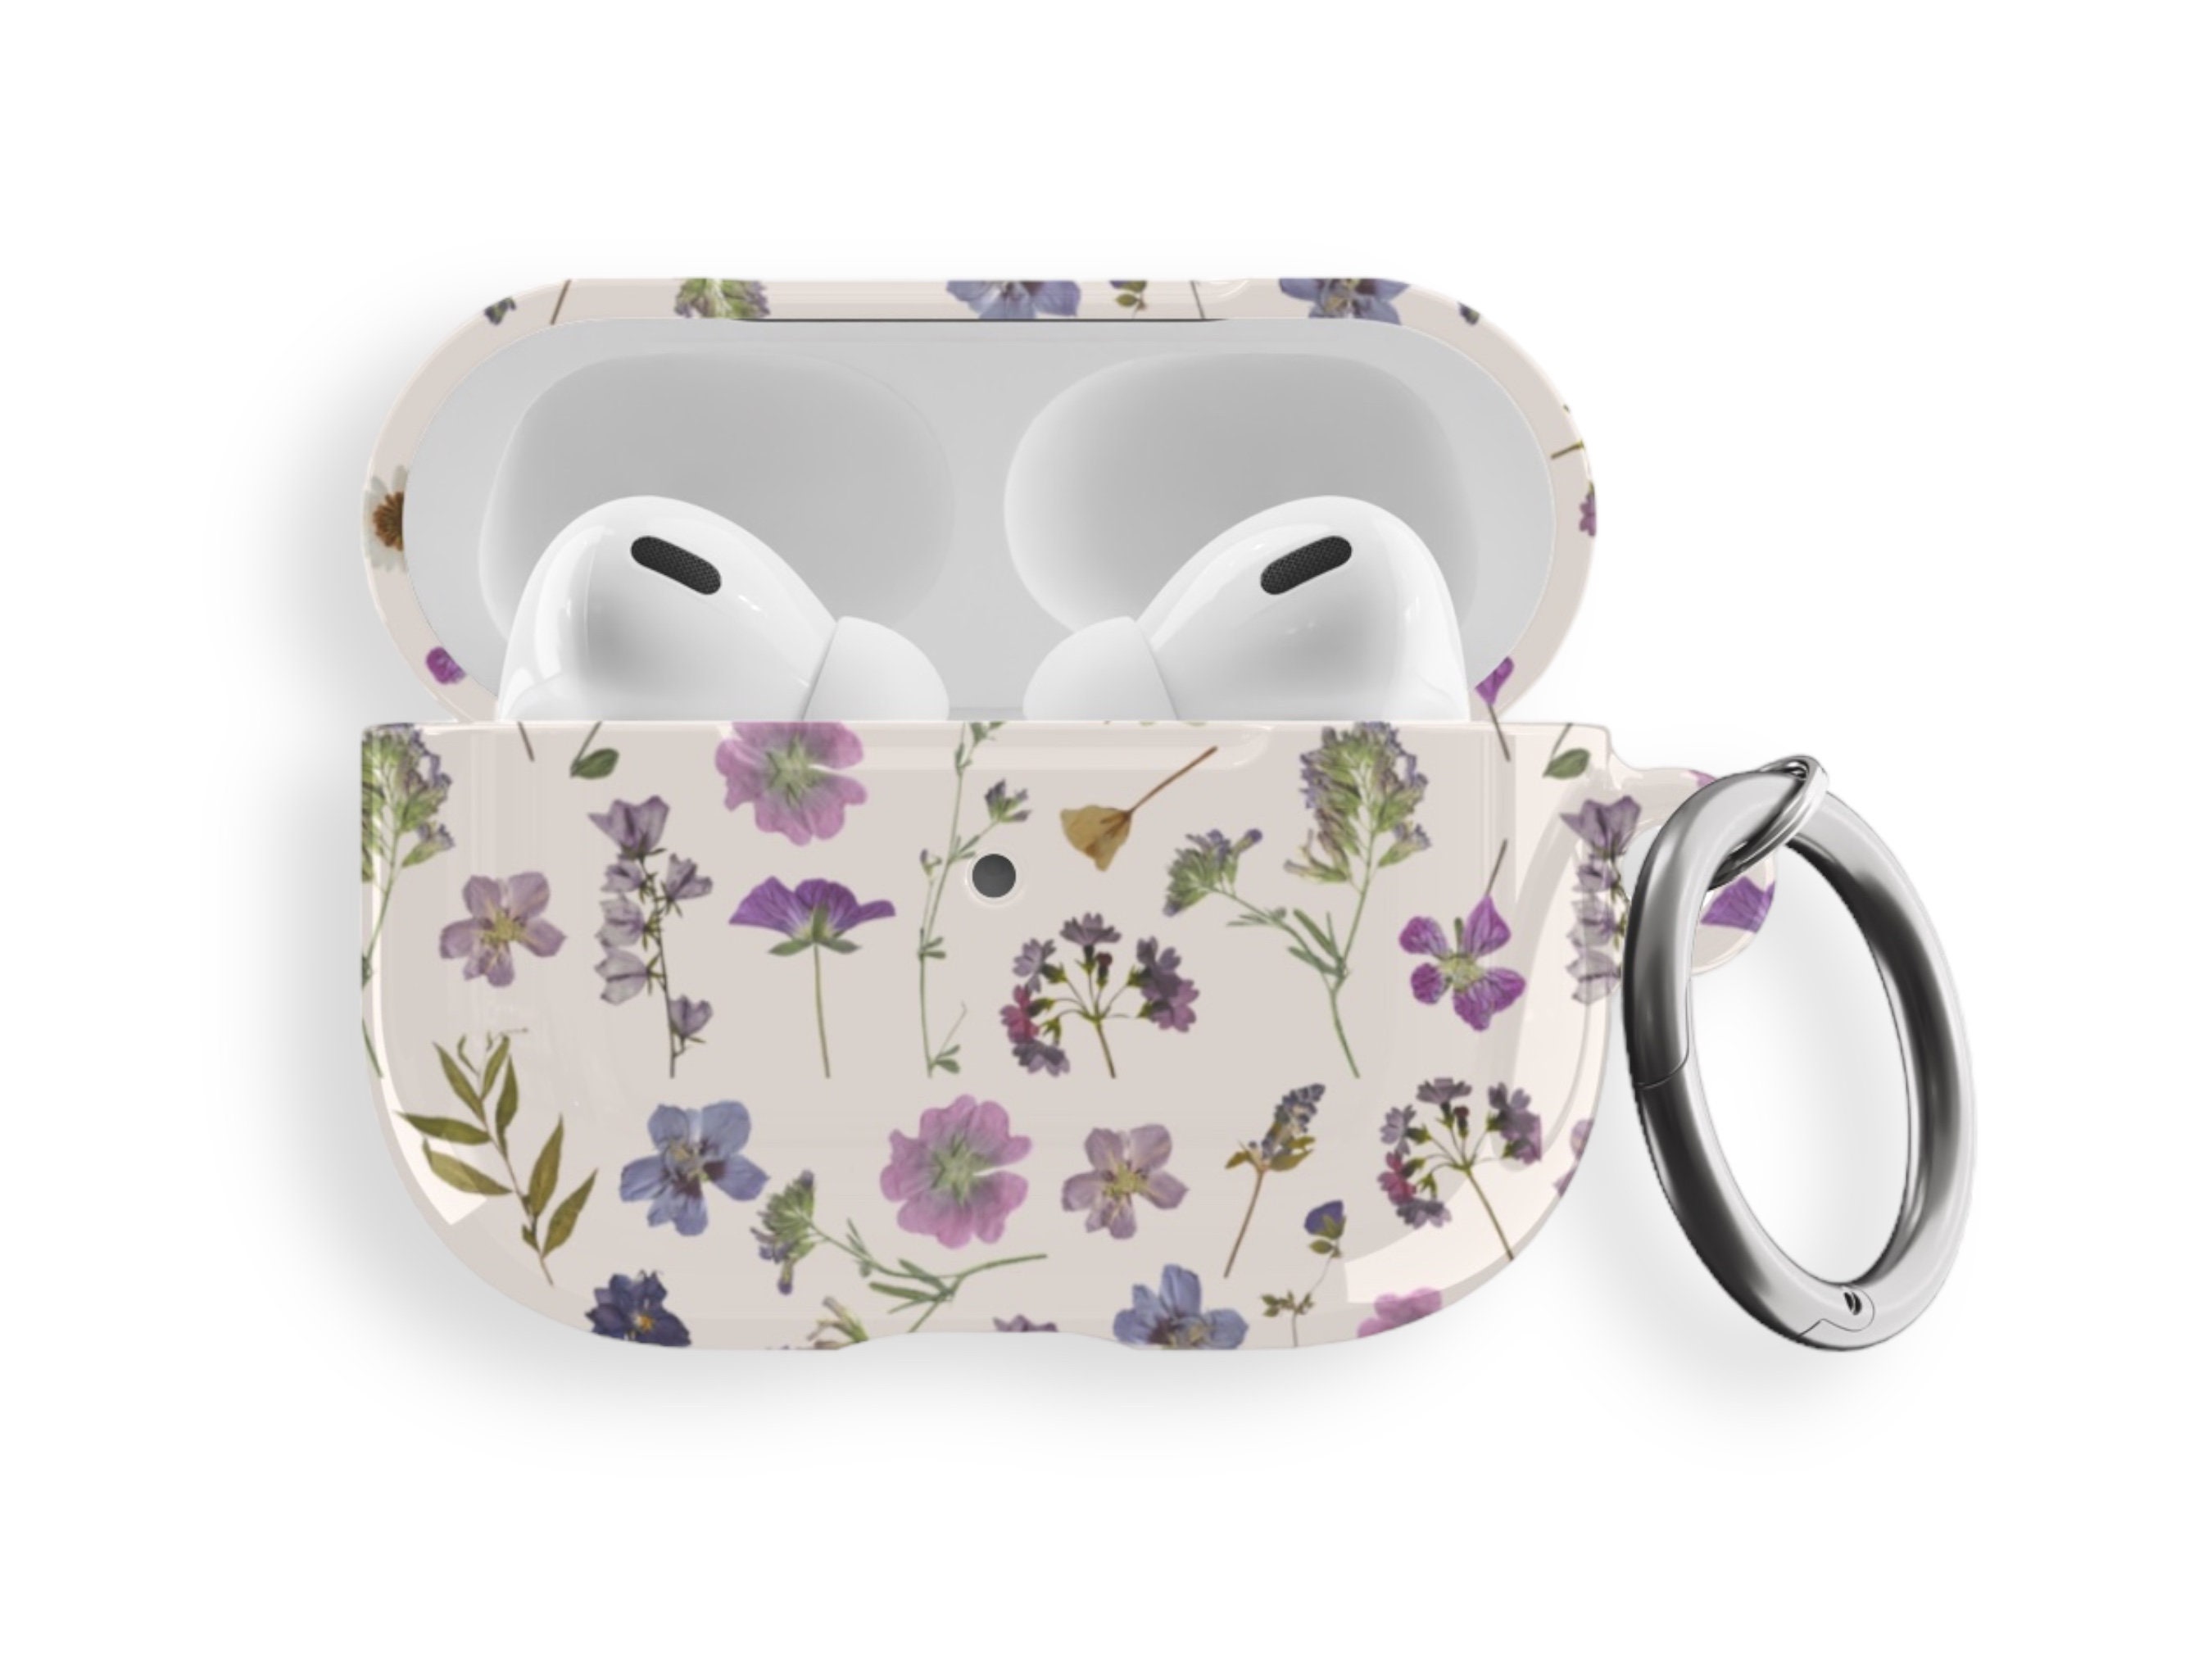 Cute Daisy Flower Case for Airpods 1&2 with Keychain, MAYCARI Floral Design  Cute Protective Soft TPU…See more Cute Daisy Flower Case for Airpods 1&2